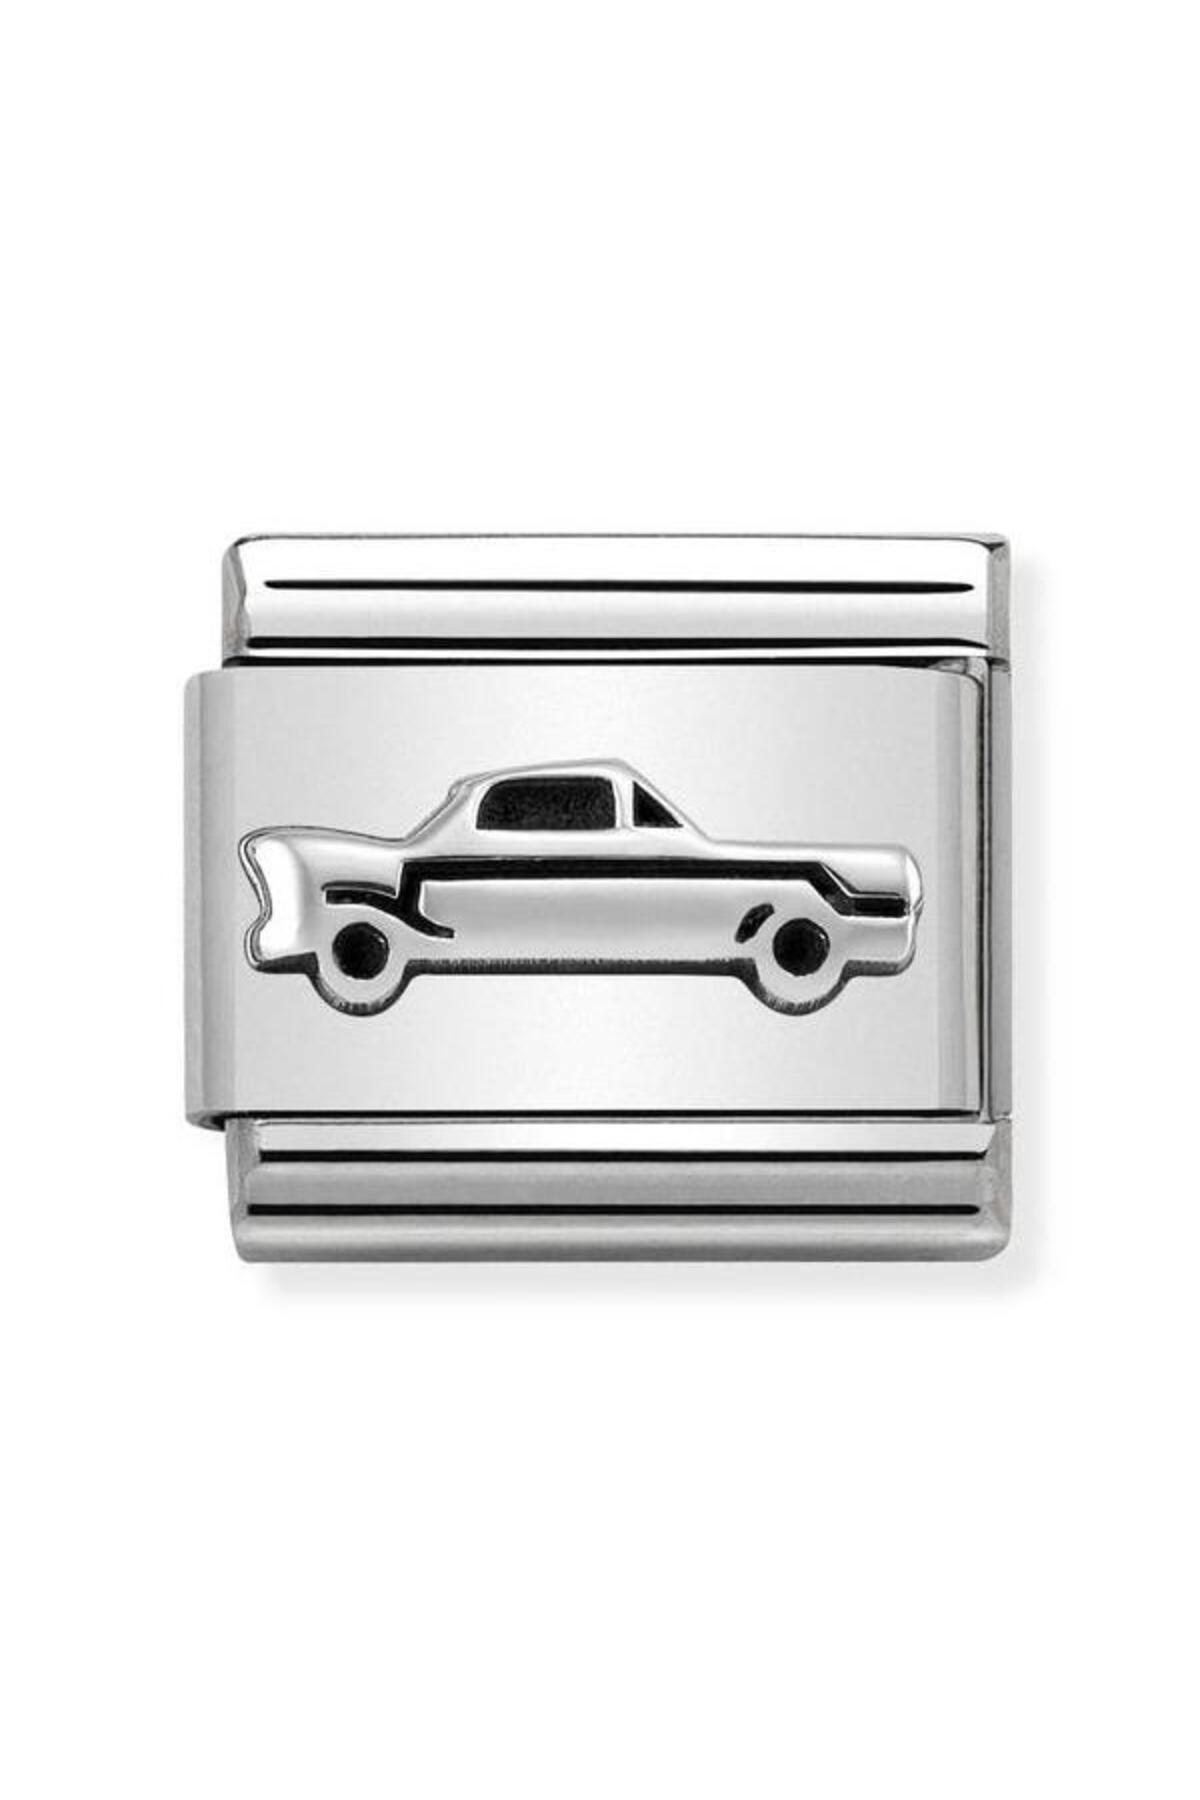 NOMİNATİON Composable Classic Oxıdızed Symbols In St,steel And Sterling Silver (33_vintage Car)